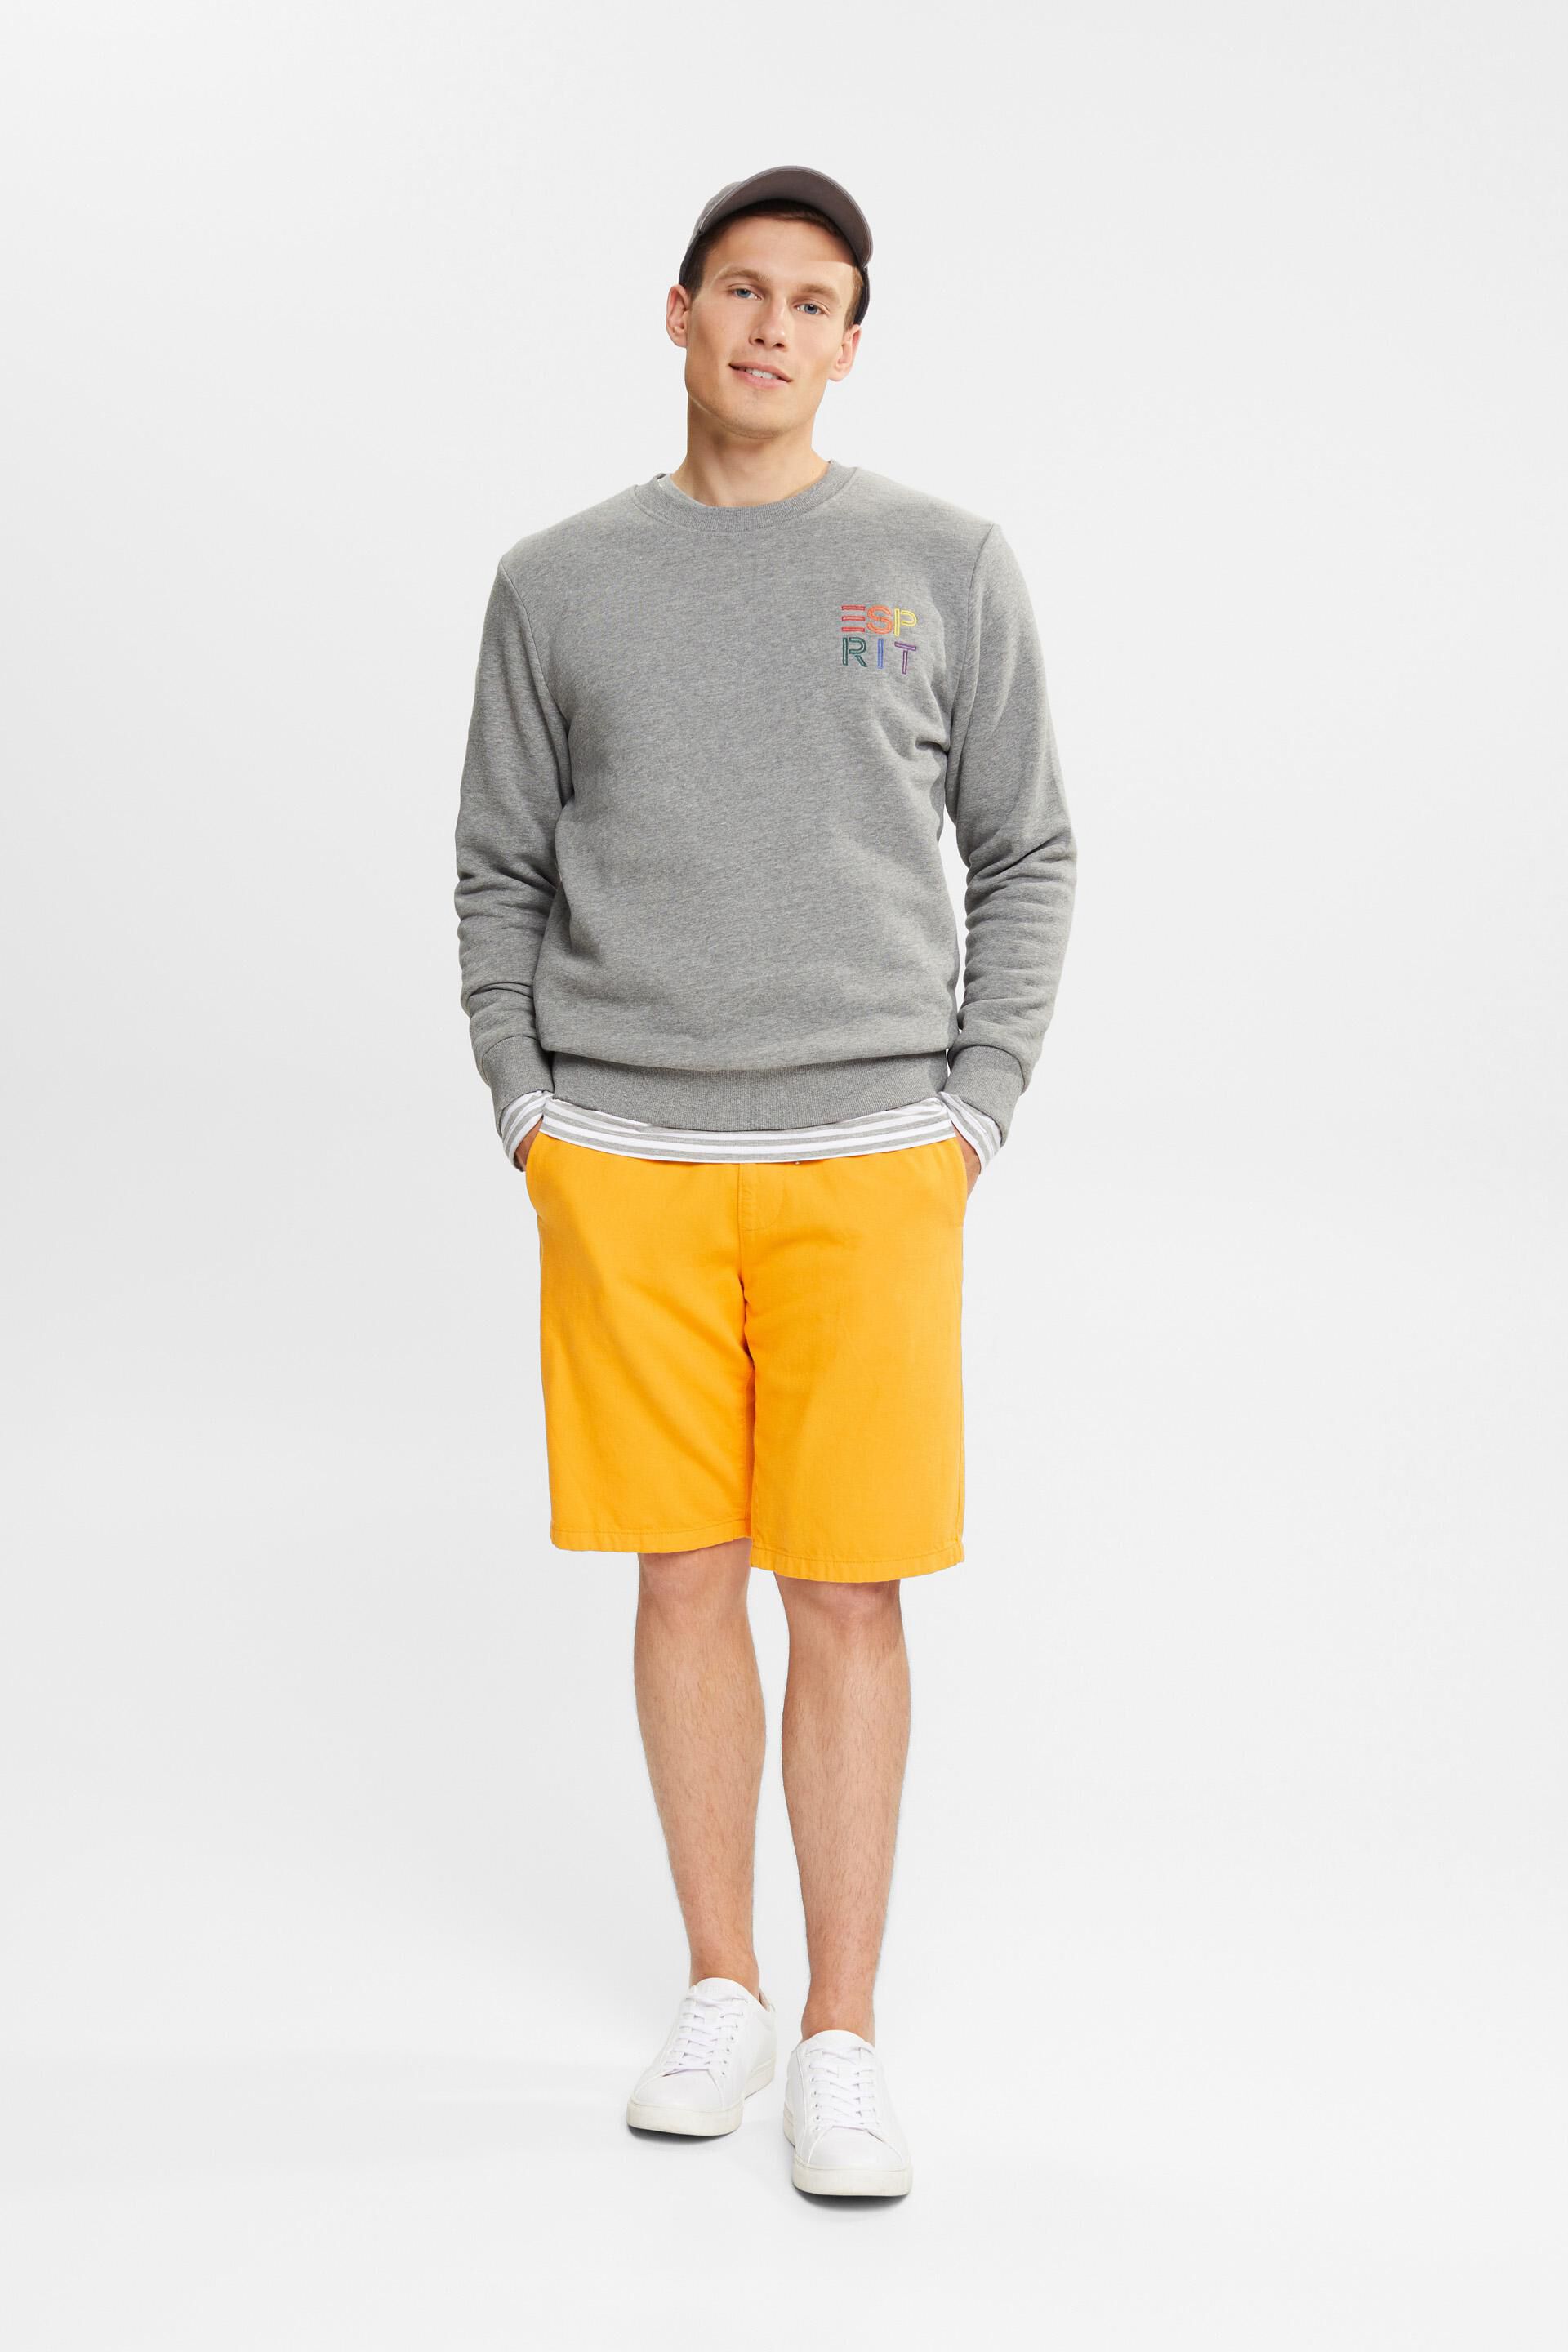 Esprit embroidered logo Sweatshirt with colourful a